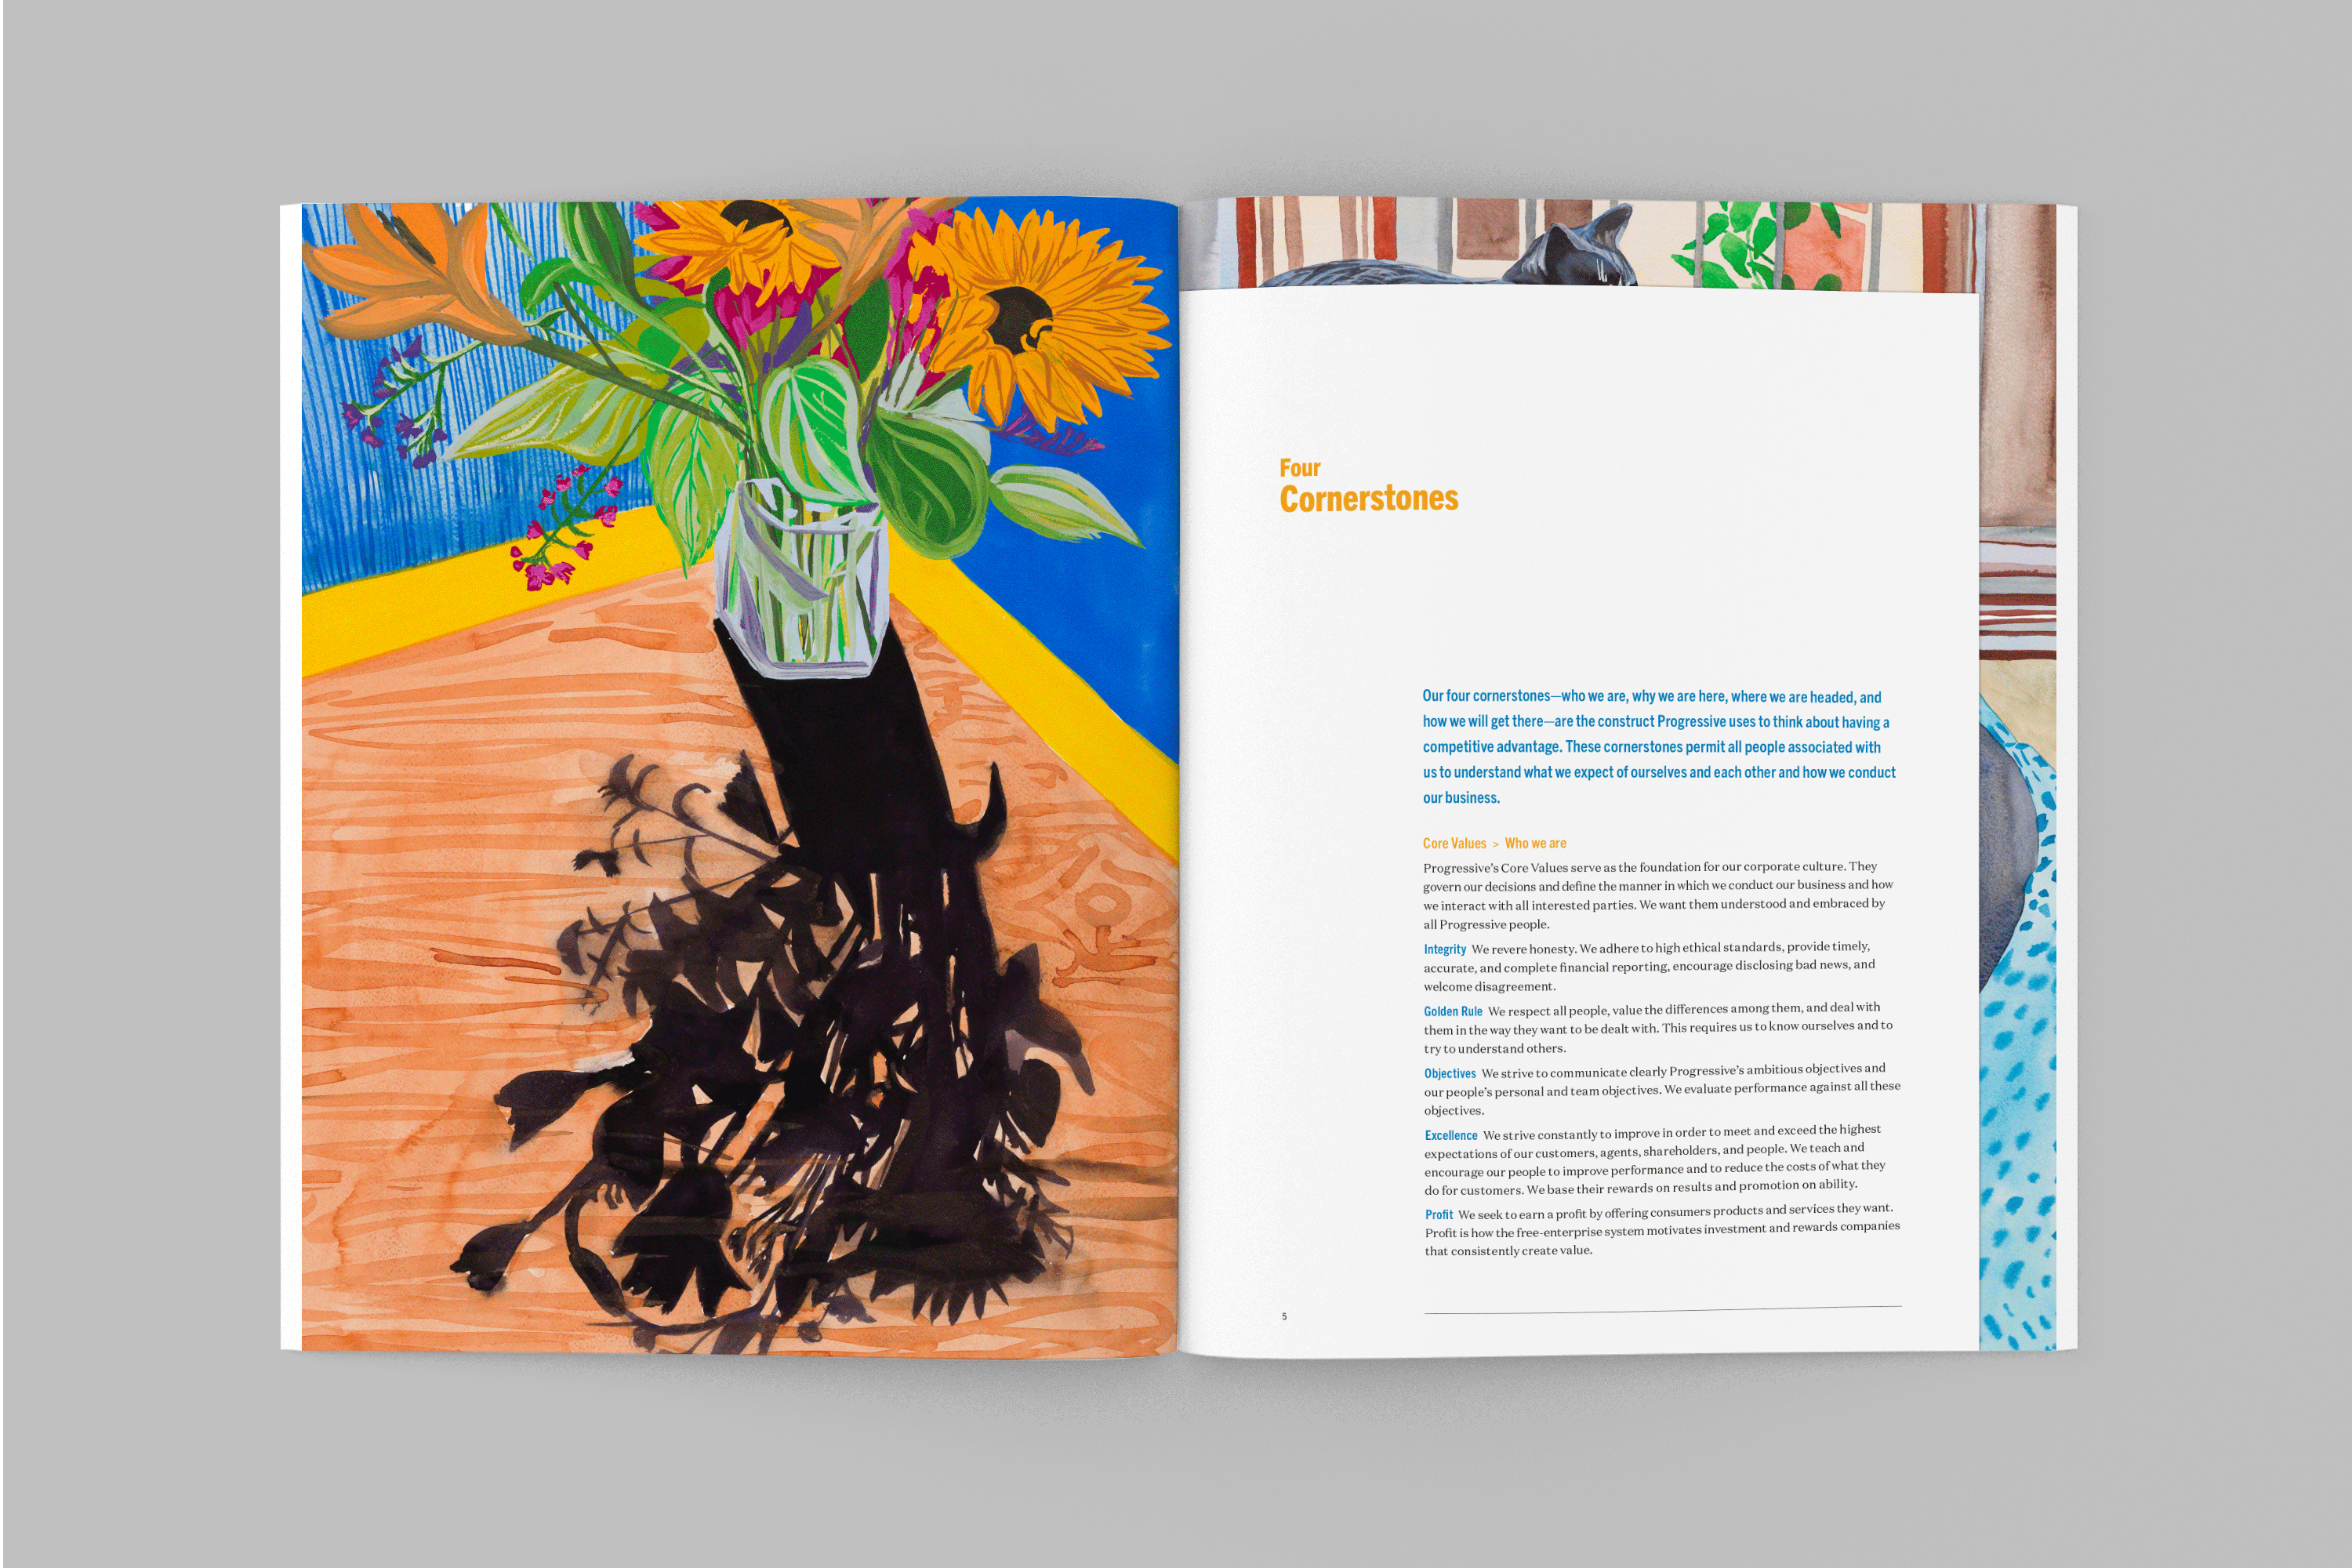 Spread from The Progressive Corporation Annual Report 202 showing a full bleed diptych artwork by Nisenbaum